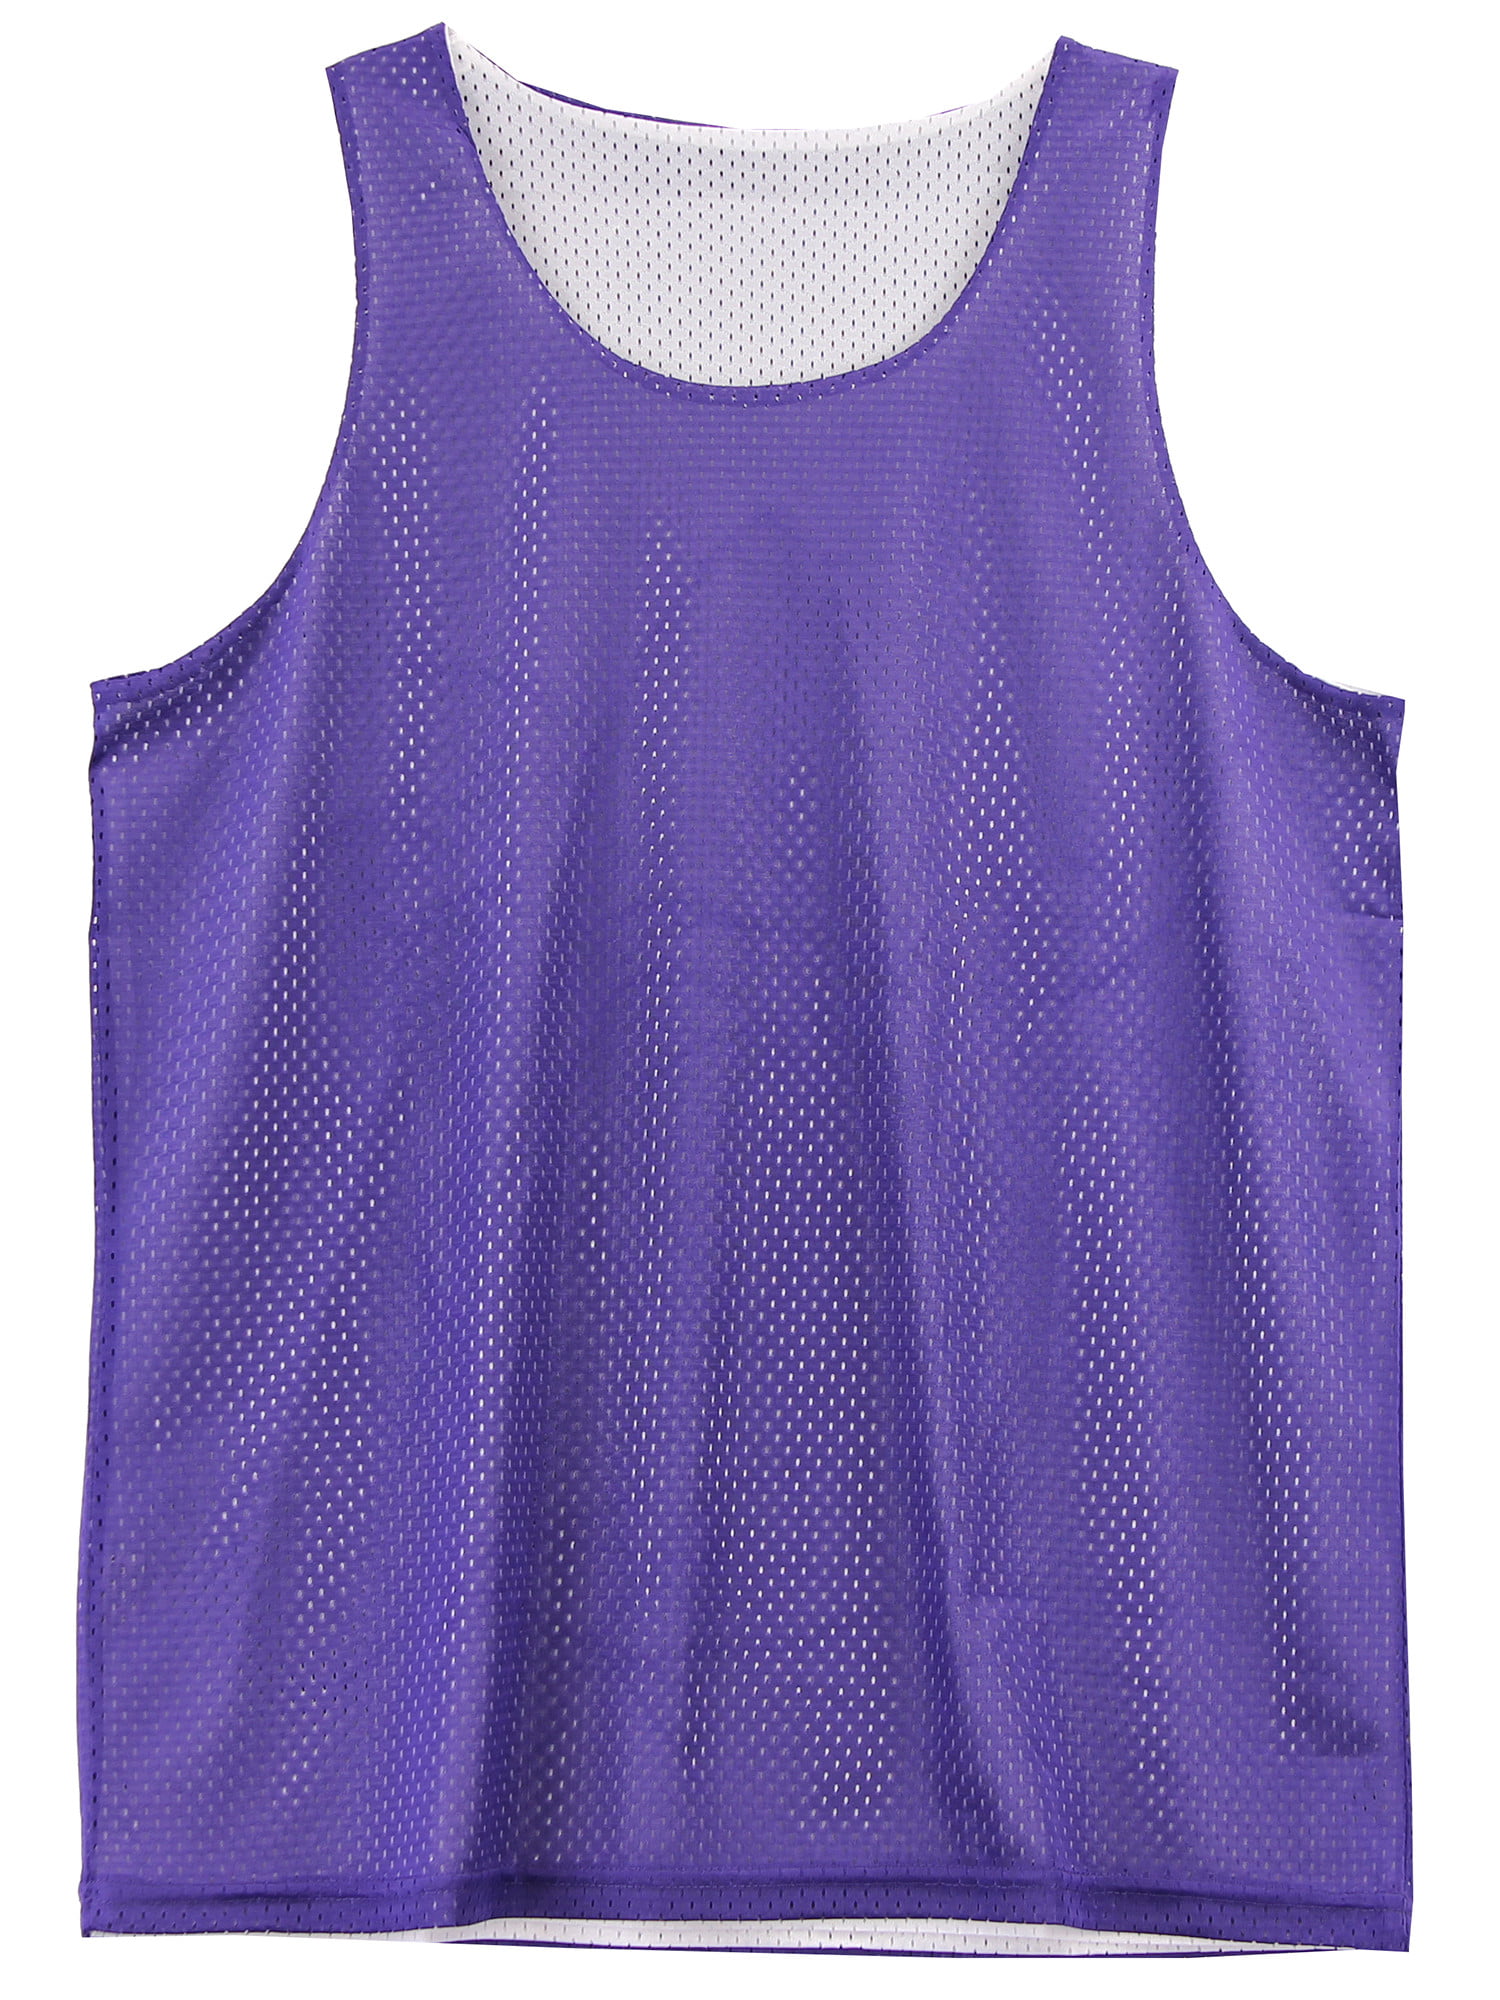 Details about   Russell Athletic Purple White Reversible Basketball Jersey Men's Sm Med Large 